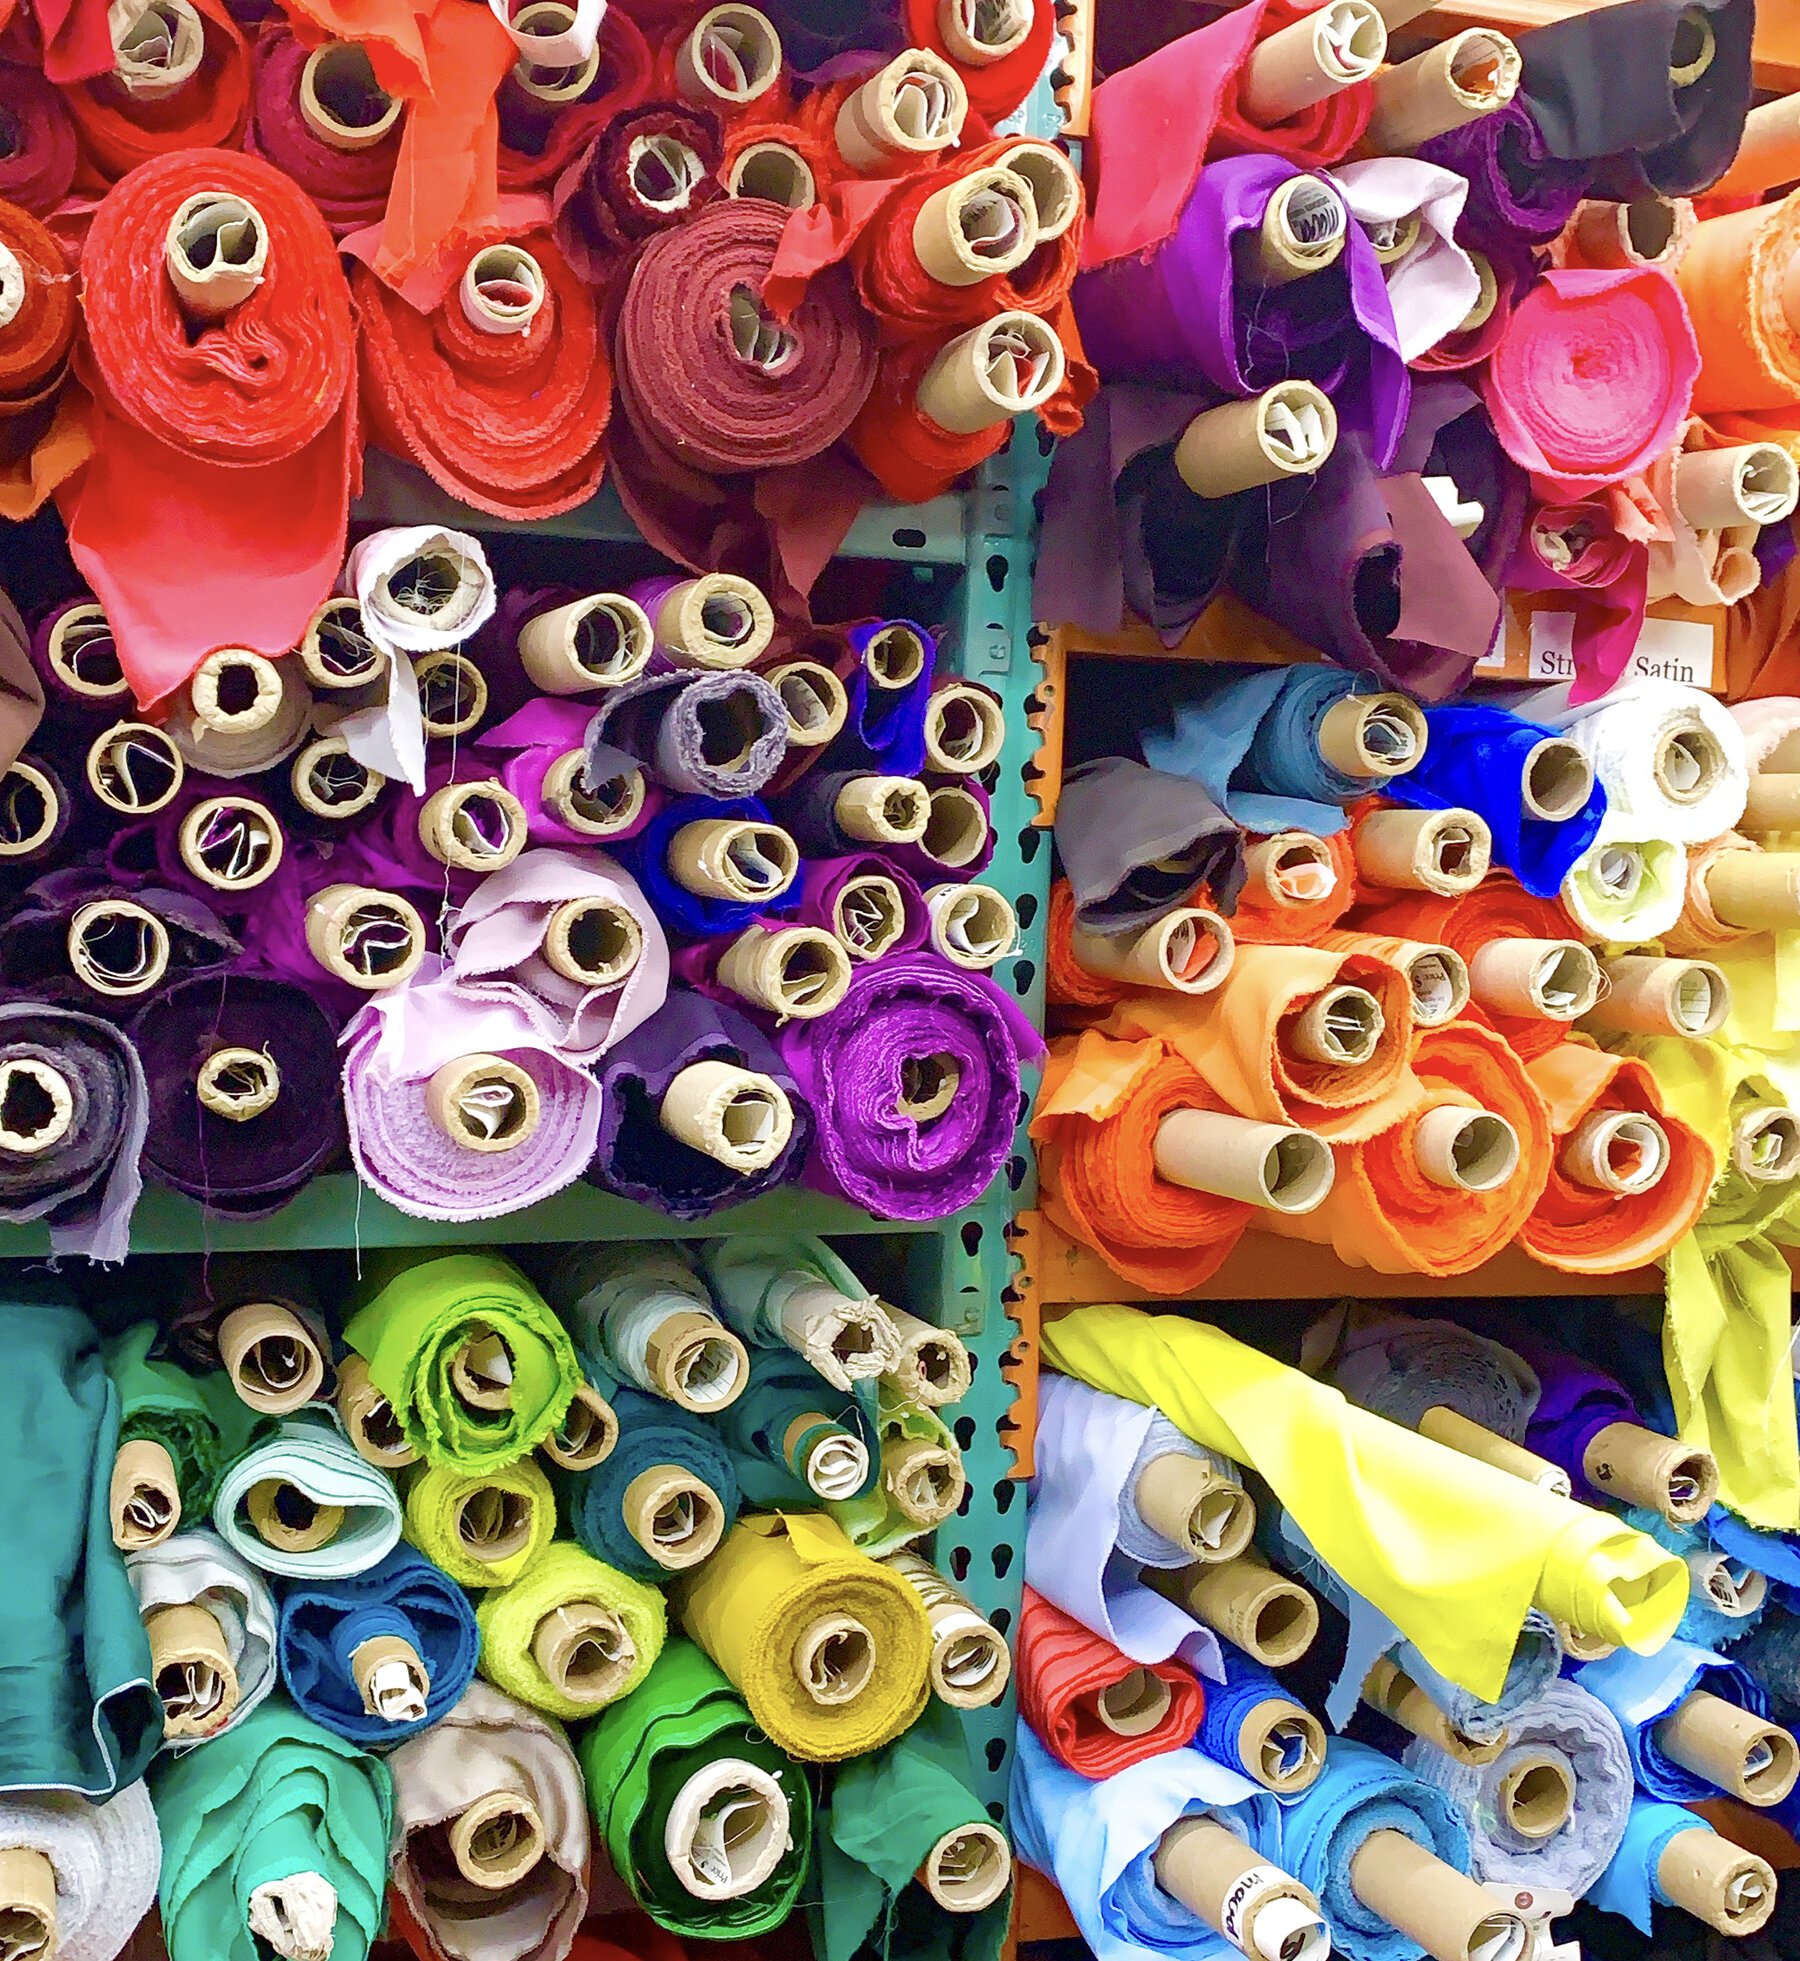 What Is Felt Fabric? - Full Textile Guide For Fashion